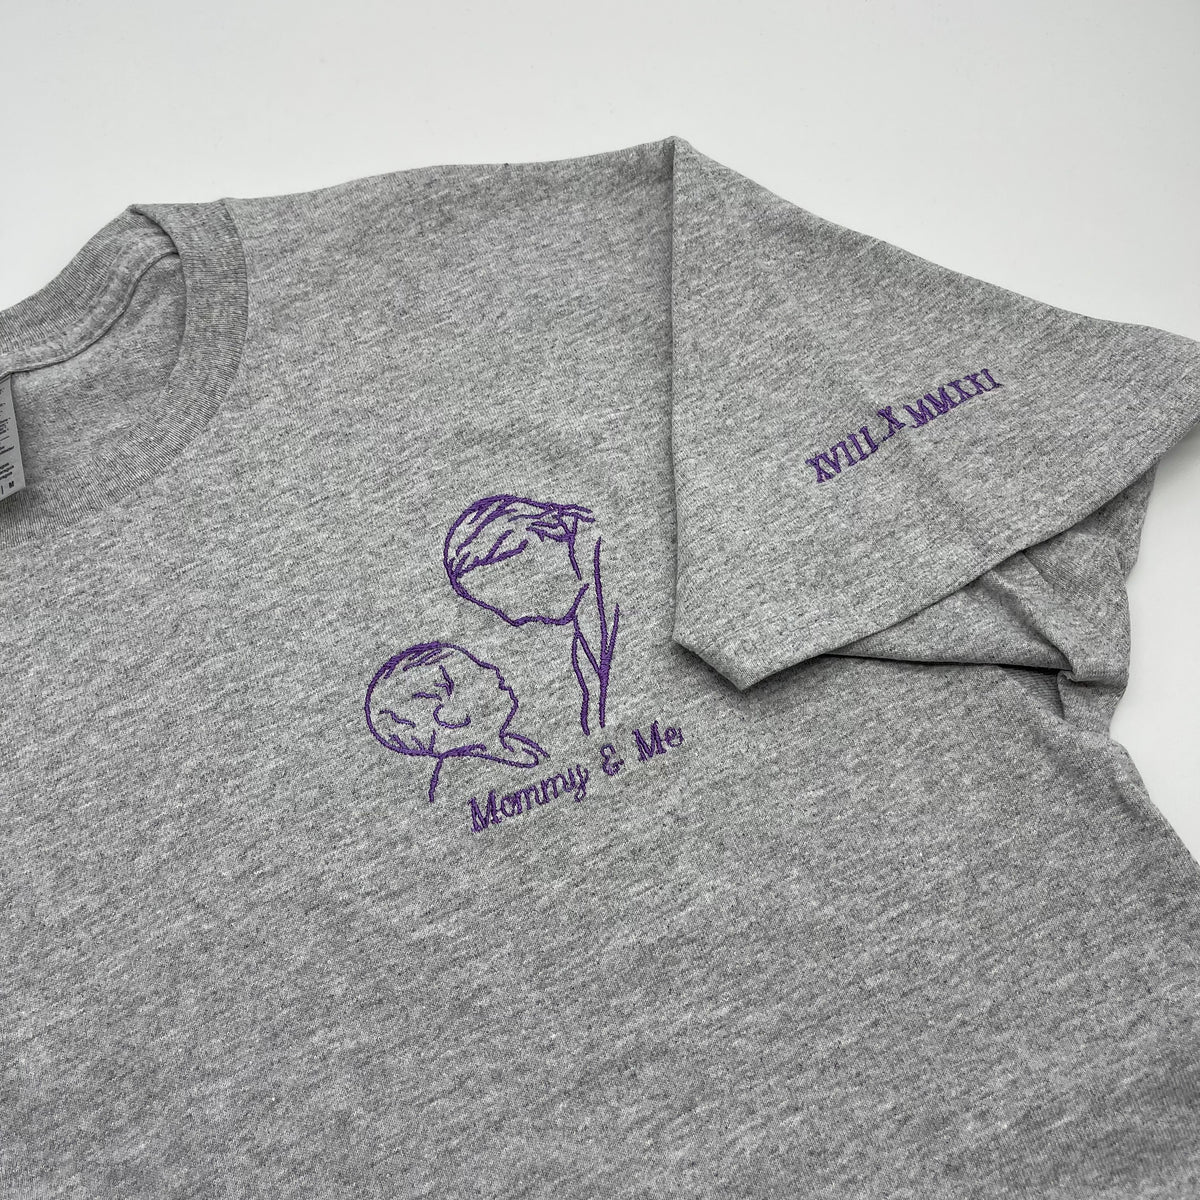 Grey Personalised portrait T-shirt.  A popular item for personalised mothers day gifts, personalised gifts for couples and customised gifts for birthday.